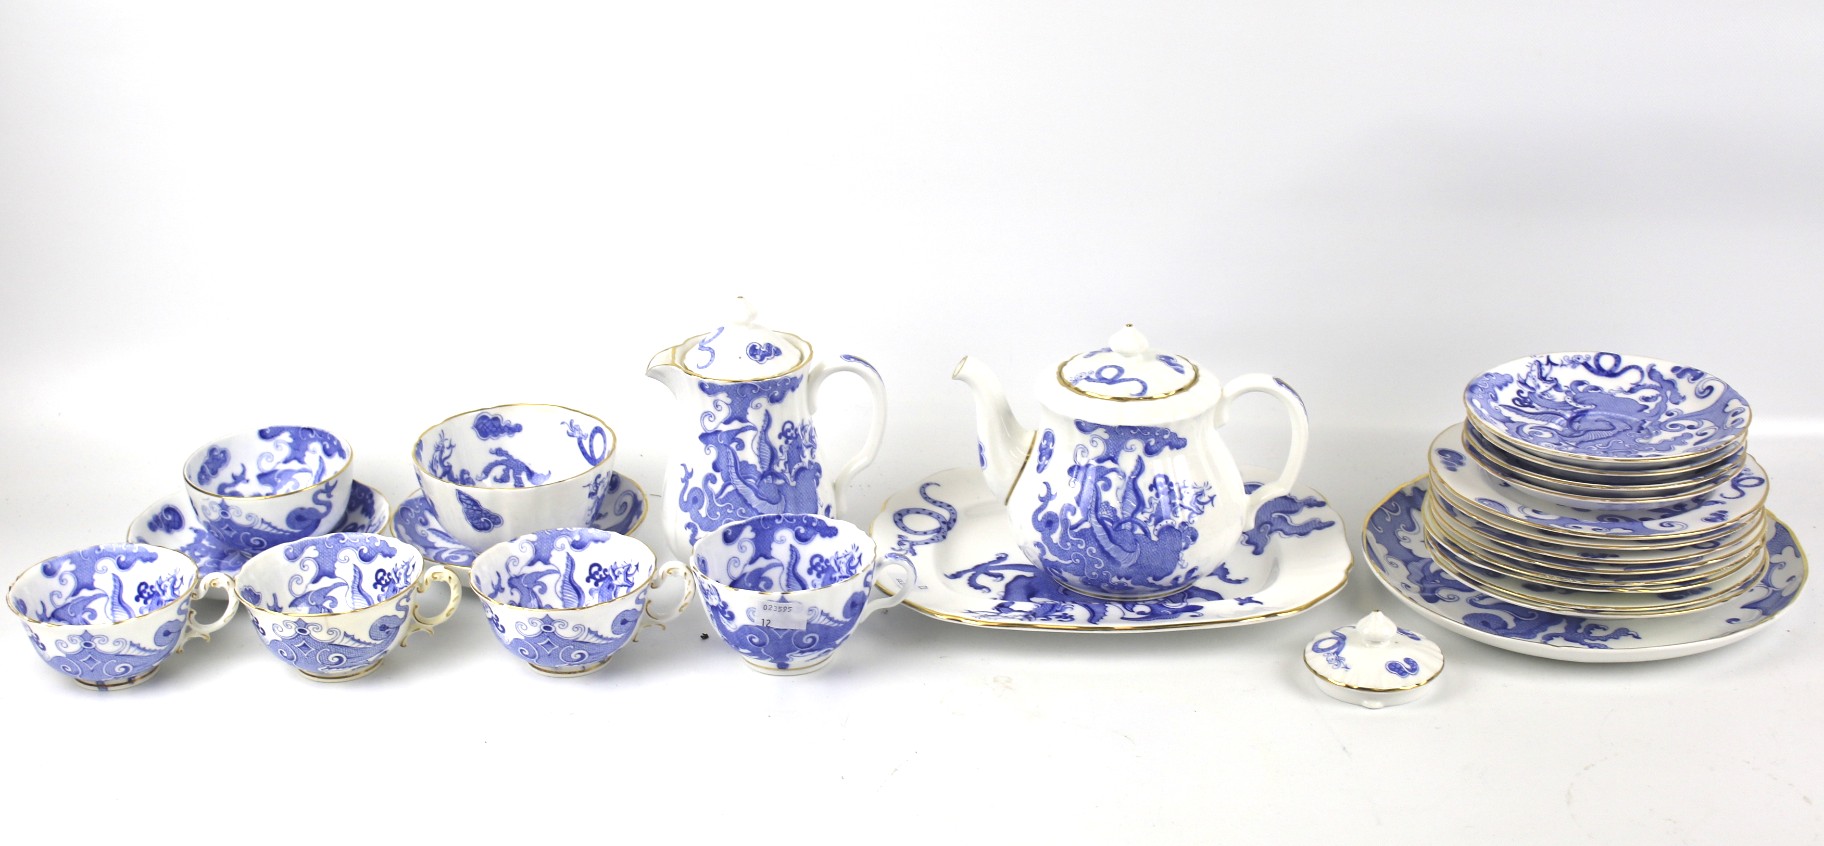 A Royal Worcester four-piece tea service in the 'Dragon' pattern.